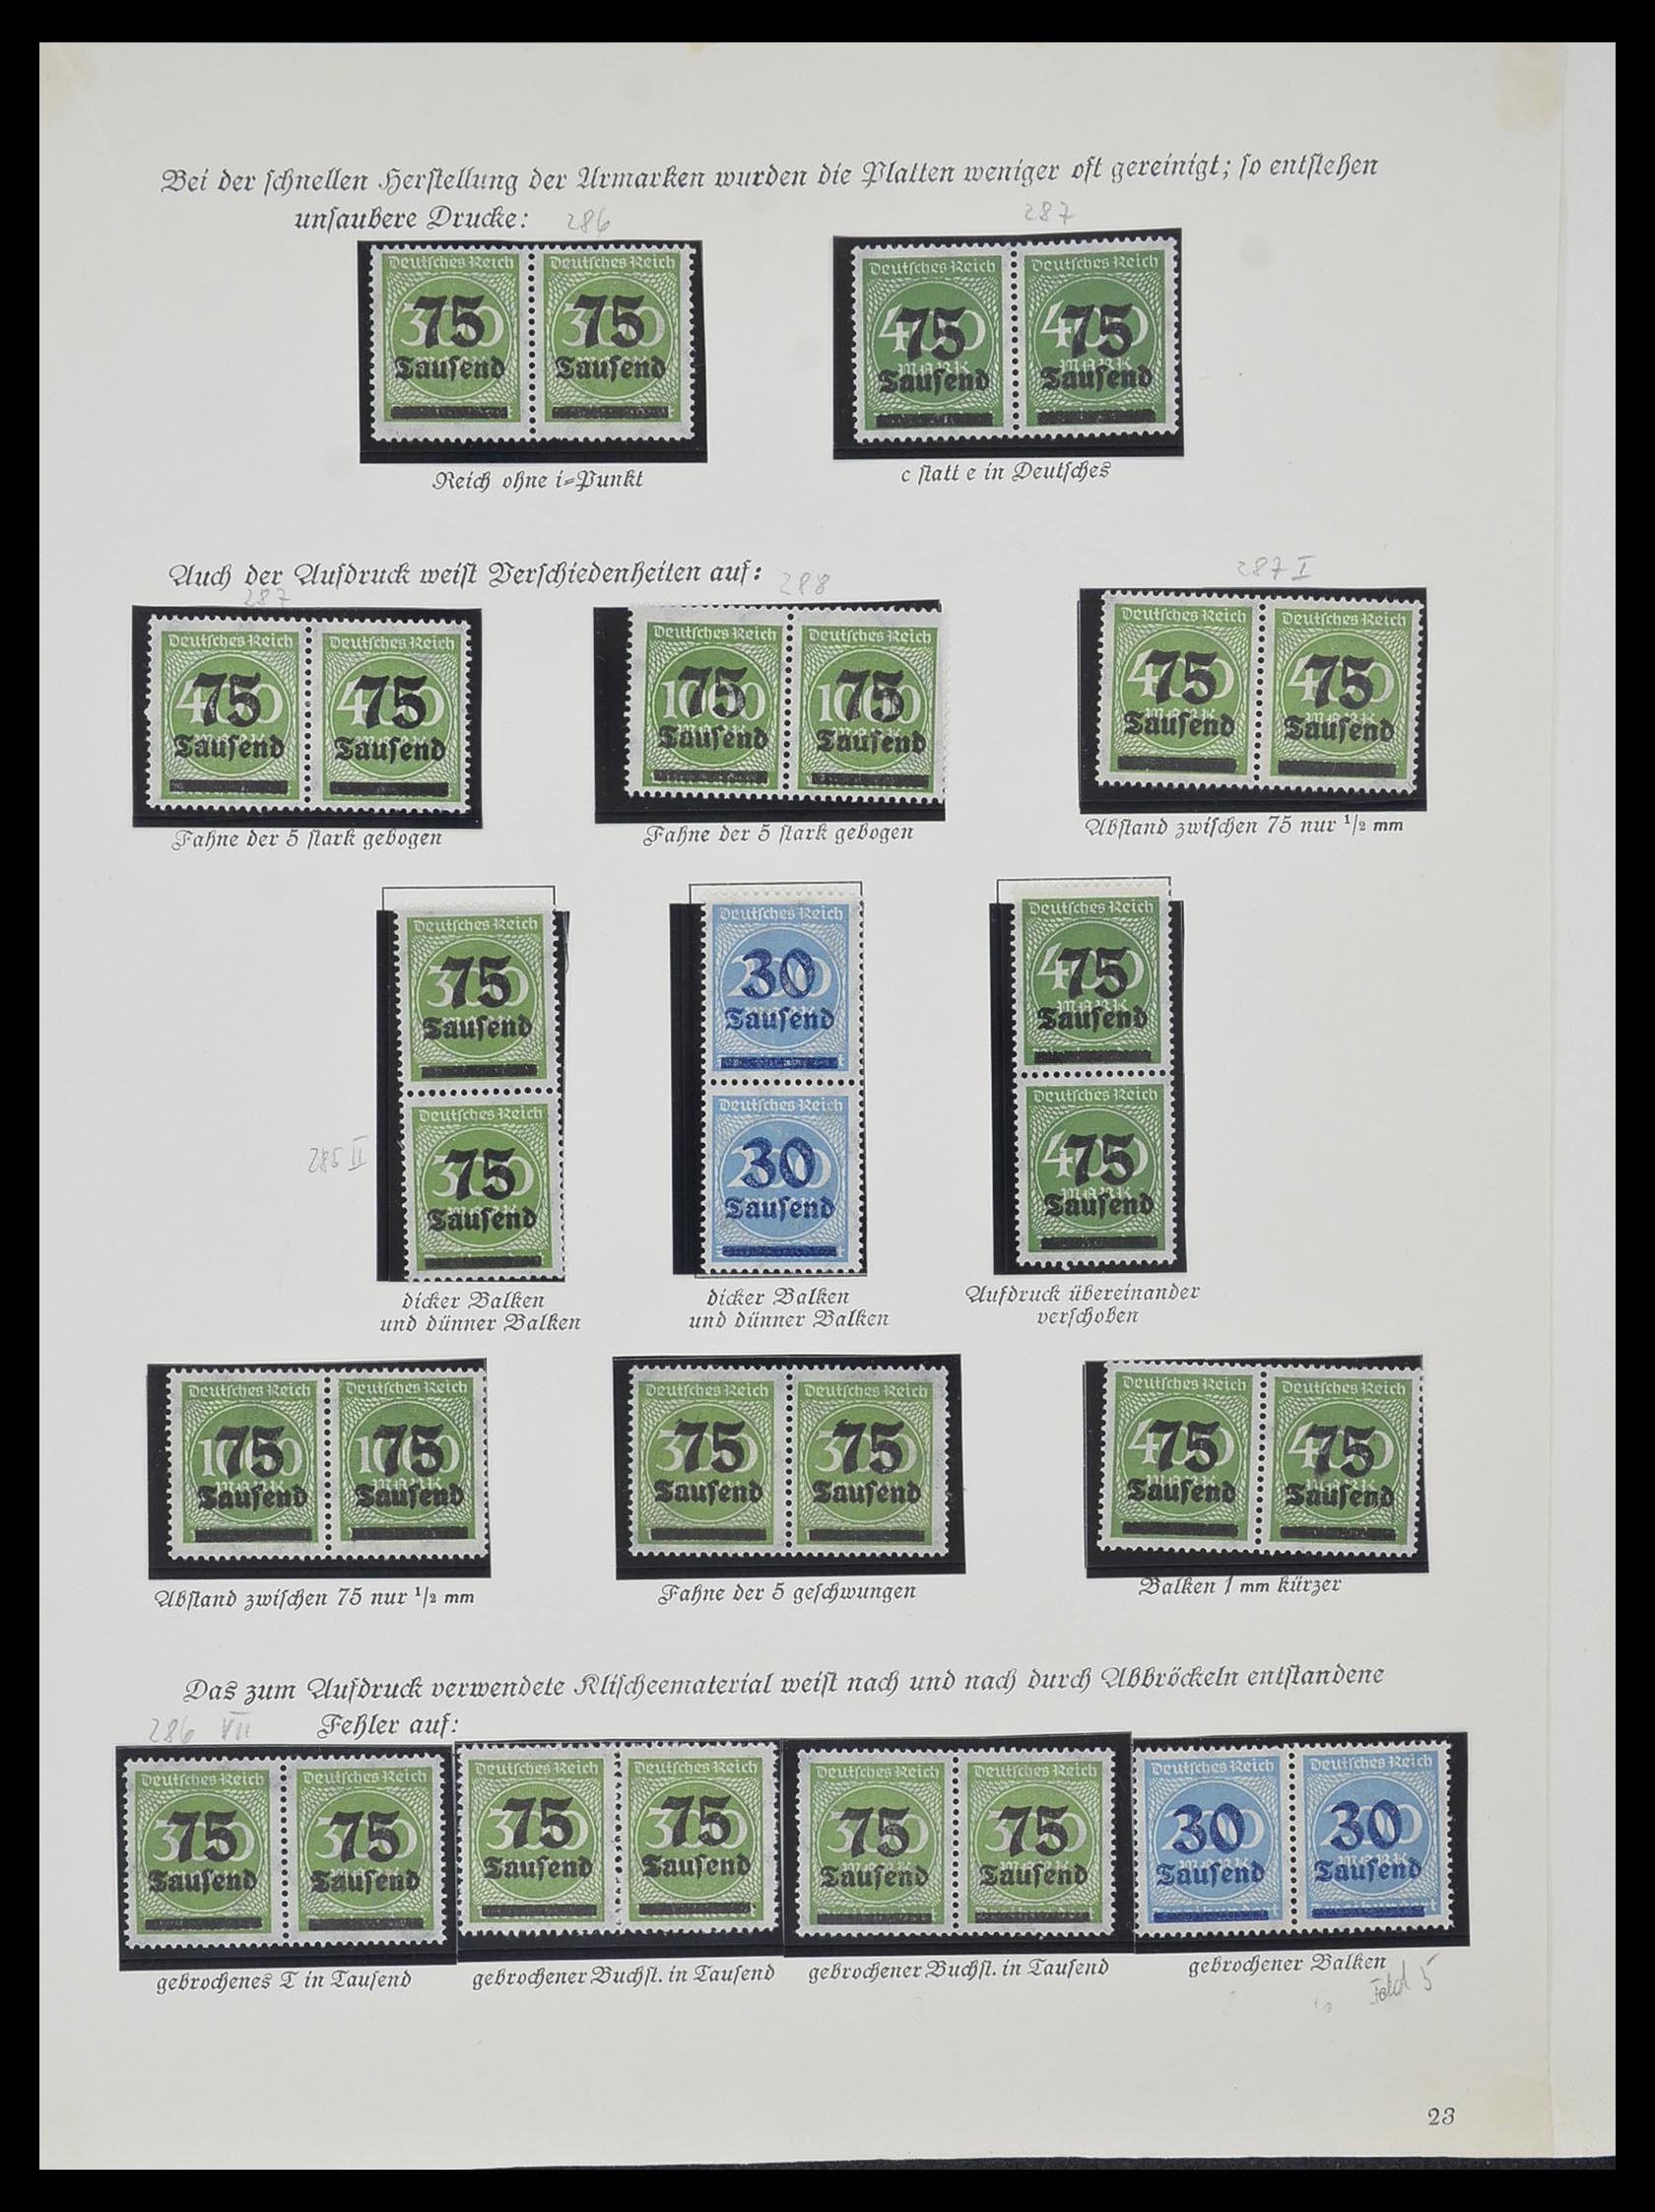 33957 010 - Stamp collection 33957 German Reich infla 1923.